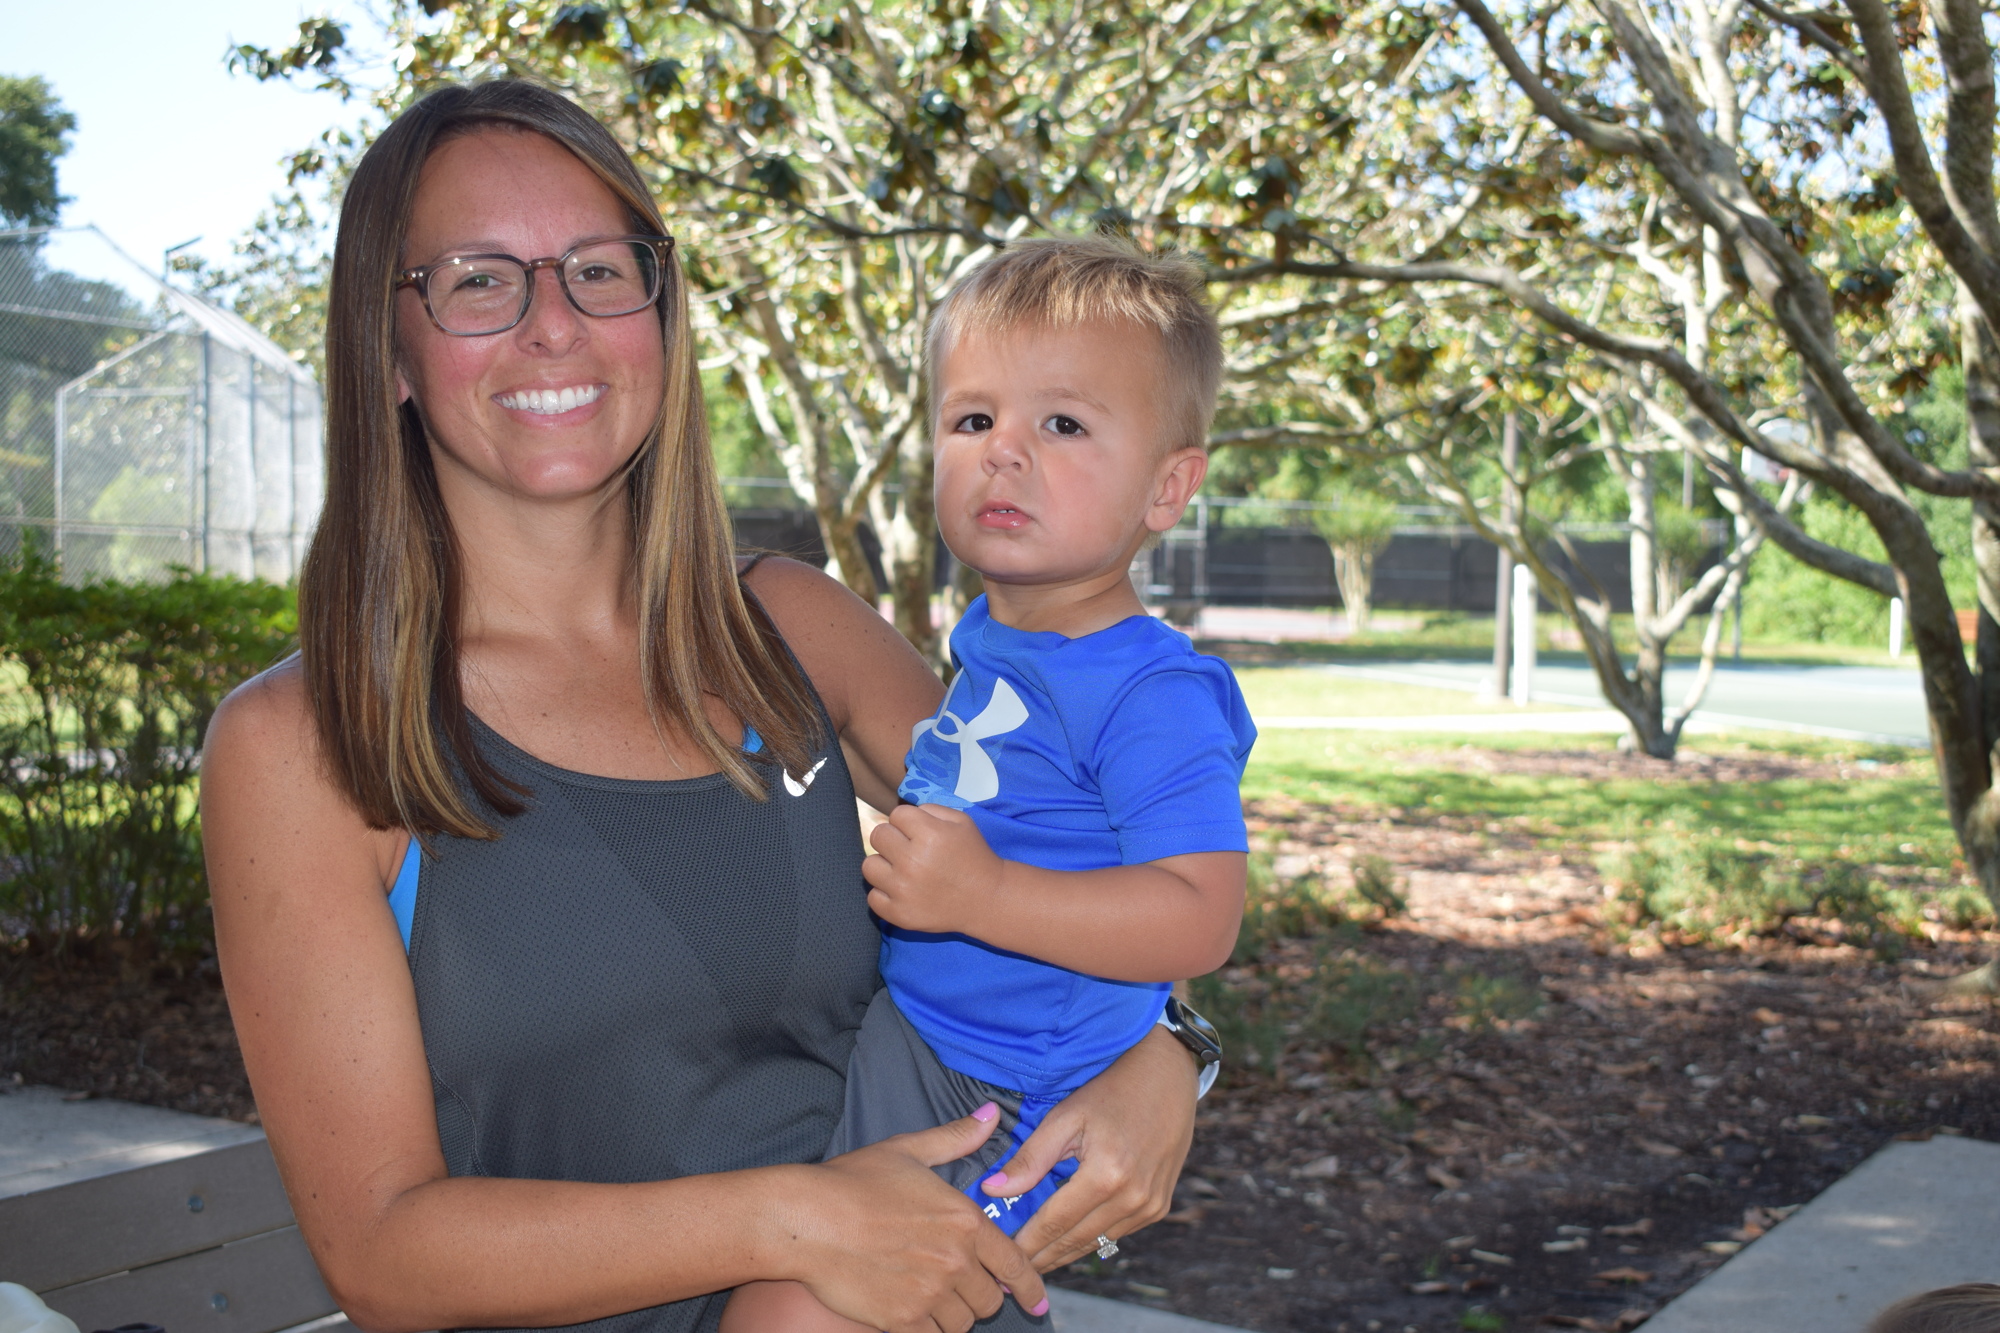 Greyhawk Landing's Della Zajda loves seeing her son Luka Zajda, who is 2, grow up and learn new things.